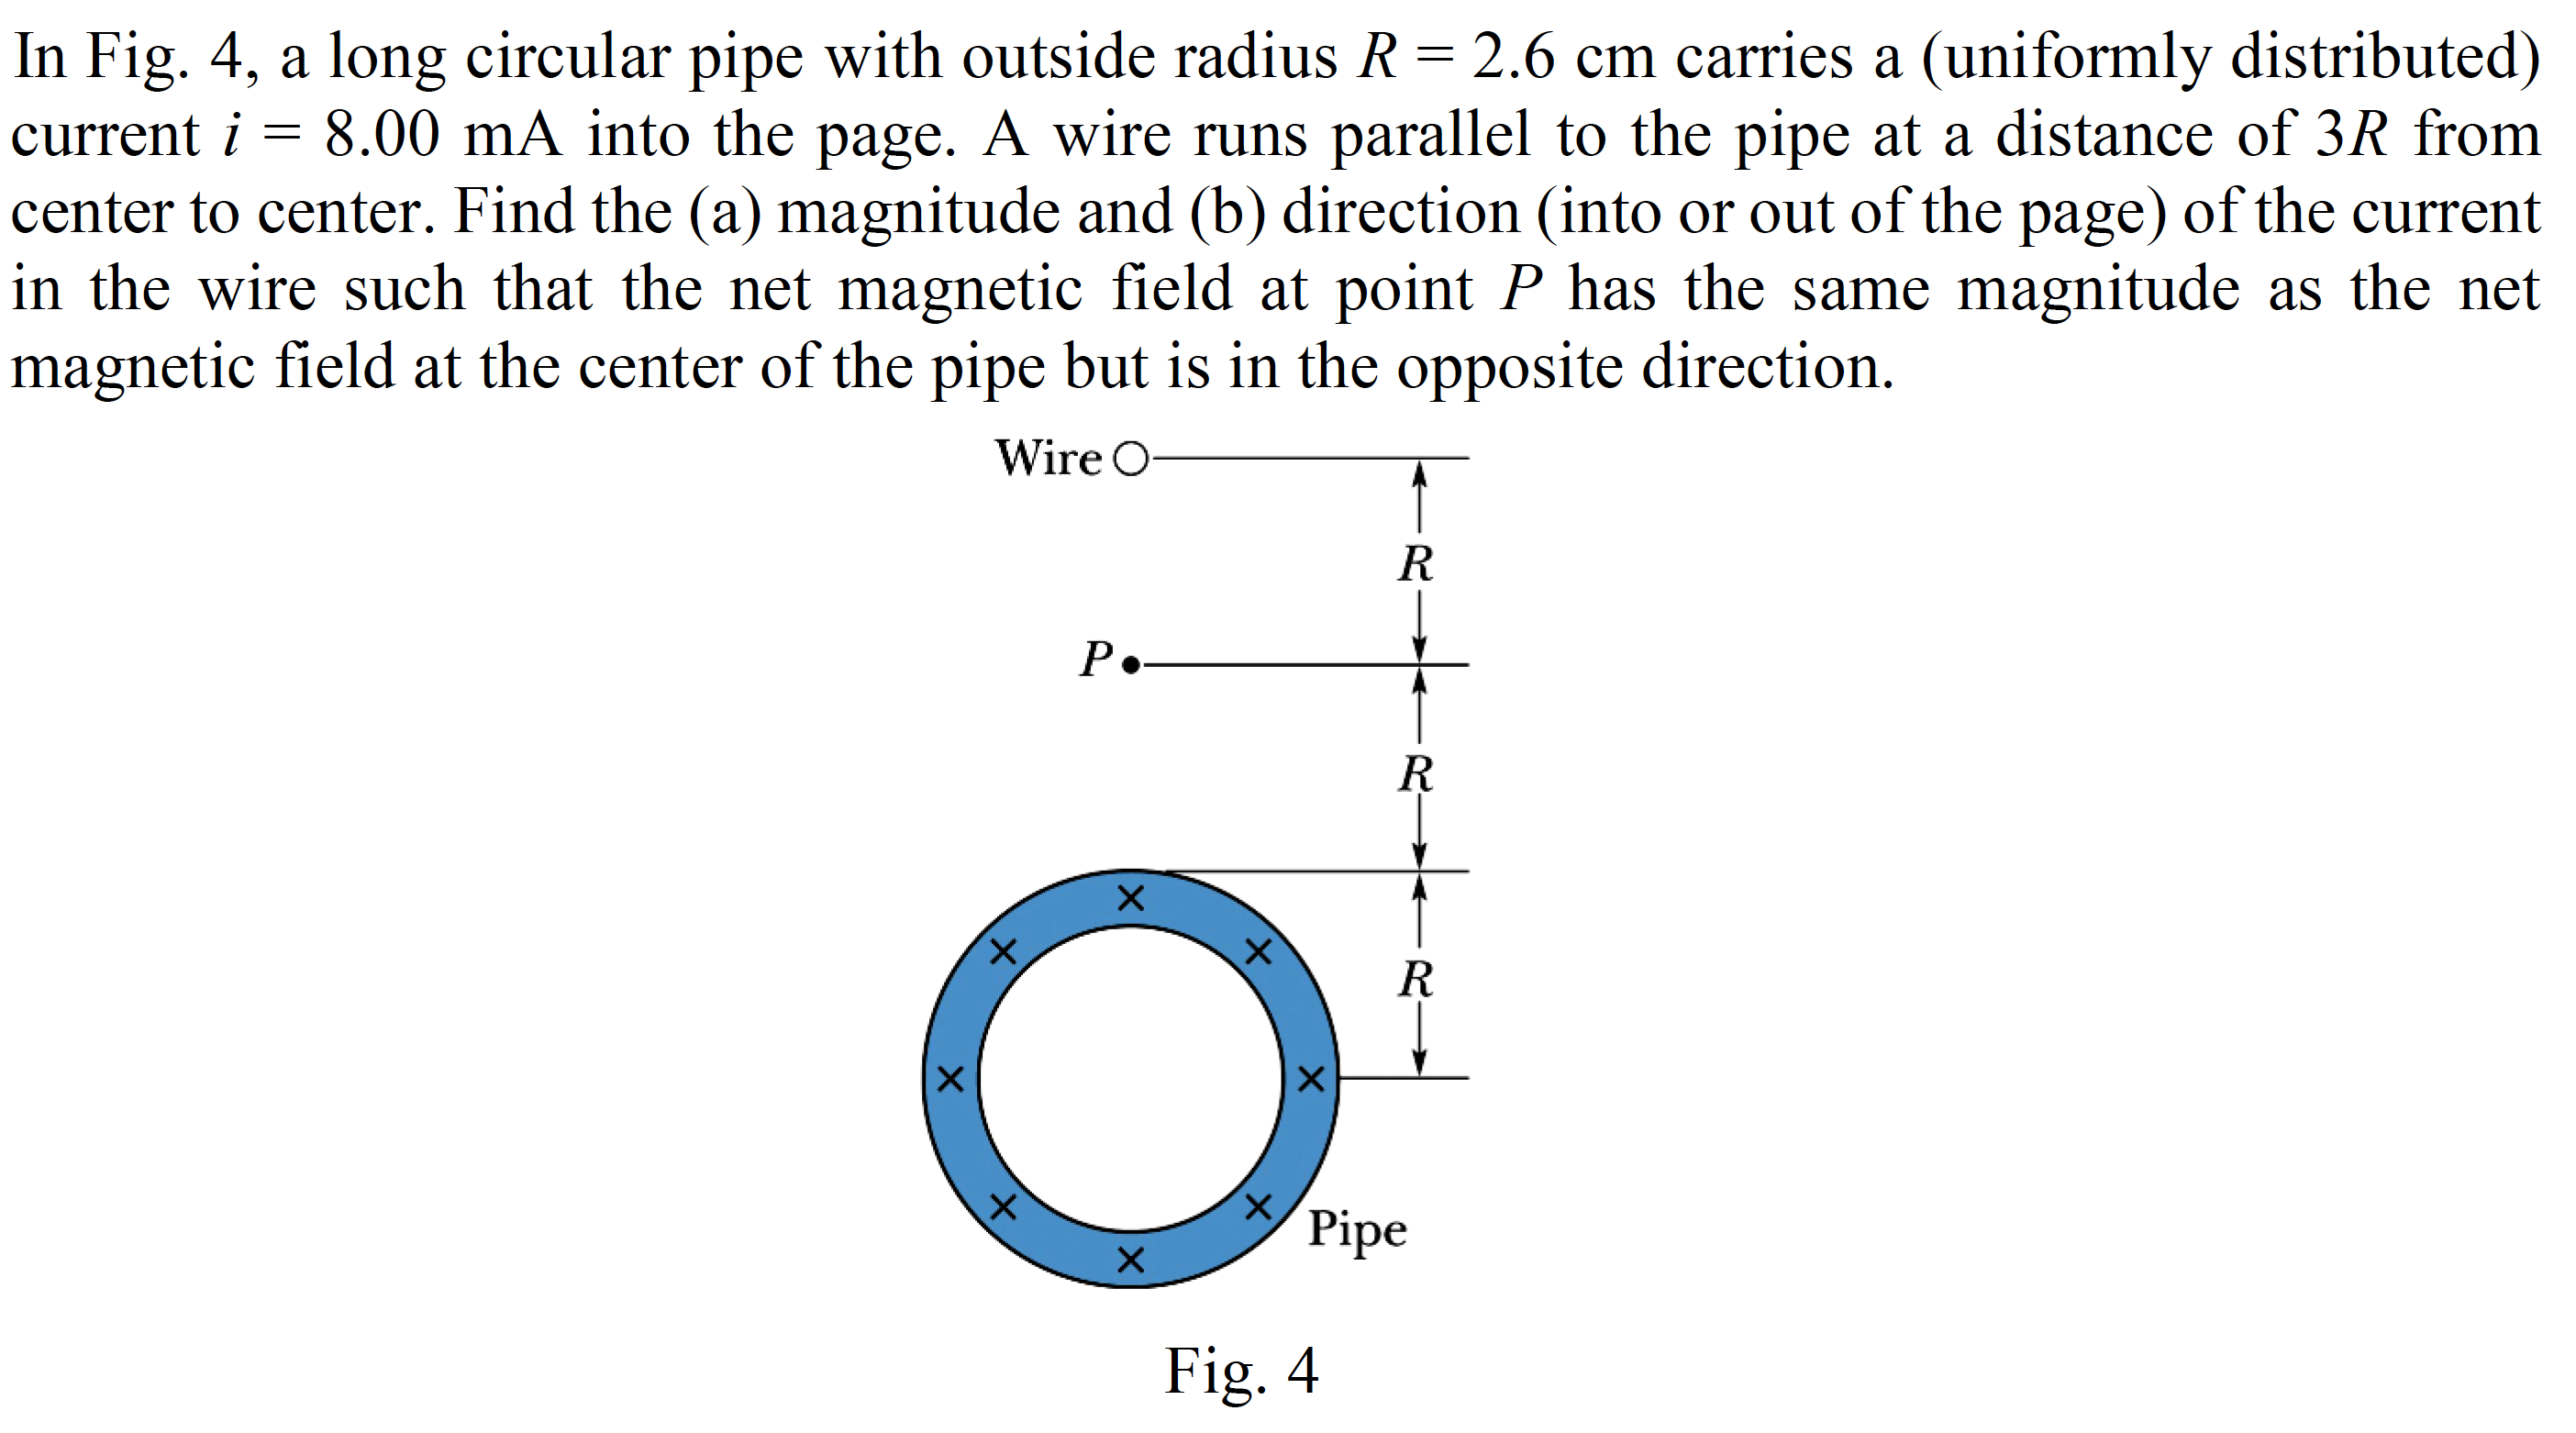 In Fig. 4, a long circular pipe with outside radius R = 2.6 cm carries a (uniformly distributed)
current i = 8.00 mA into the page. A wire runs parallel to the pipe at a distance of 3R from
center to center. Find the (a) magnitude and (b) direction (into or out of the page) of the current
in the wire such that the net magnetic field at point P has the same magnitude as the net
magnetic field at the center of the pipe but is in the opposite direction.
Wire O-
P.-
х
X.
Pipe
Fig. 4
